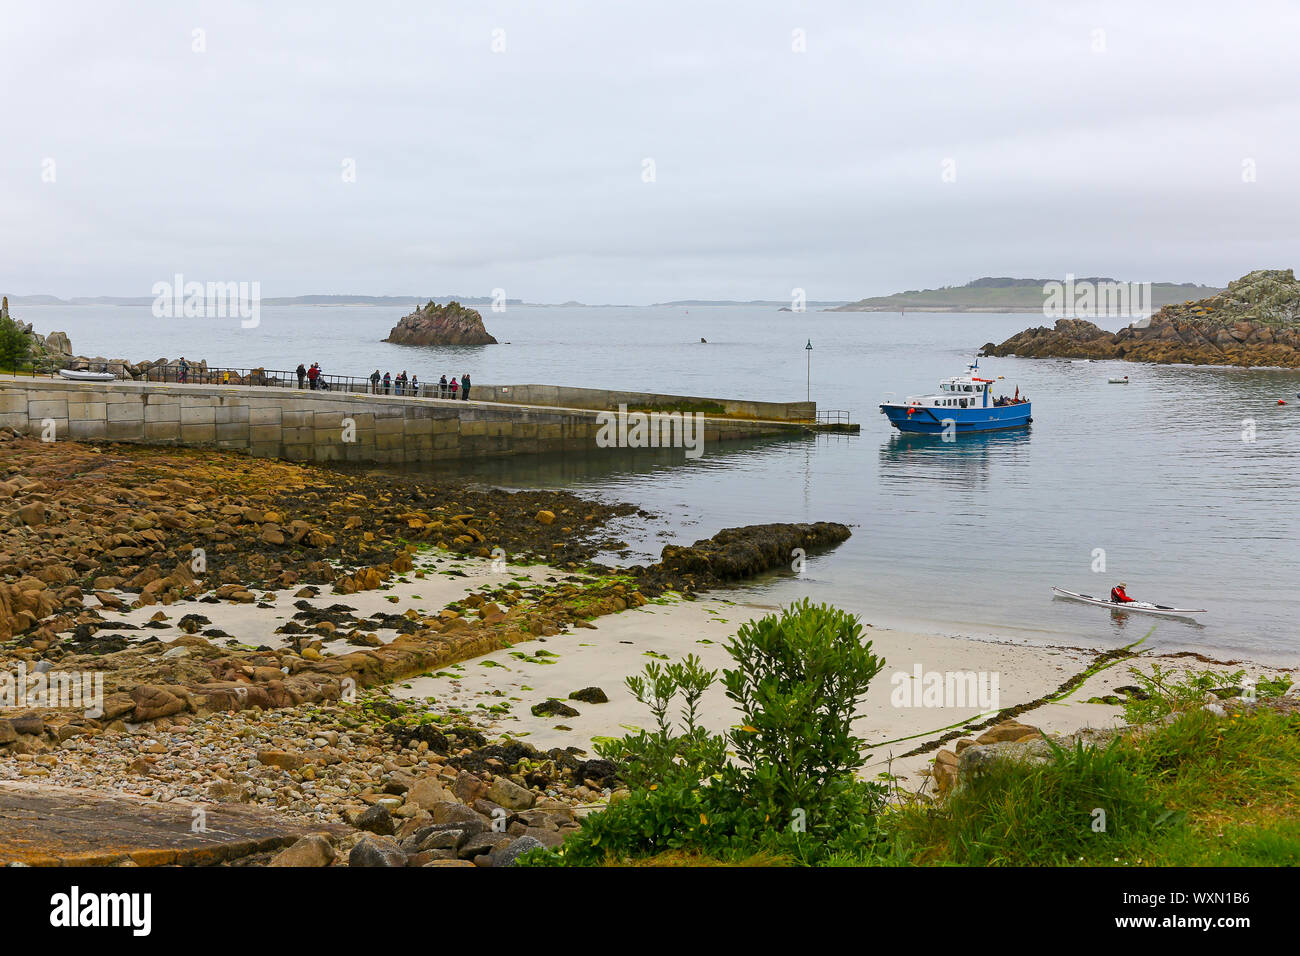 A boat called Firethorn arriving, and tourists waiting to board, at the quay at St. Agnes Island, Isles of Scilly, Cornwall, England, UK Stock Photo